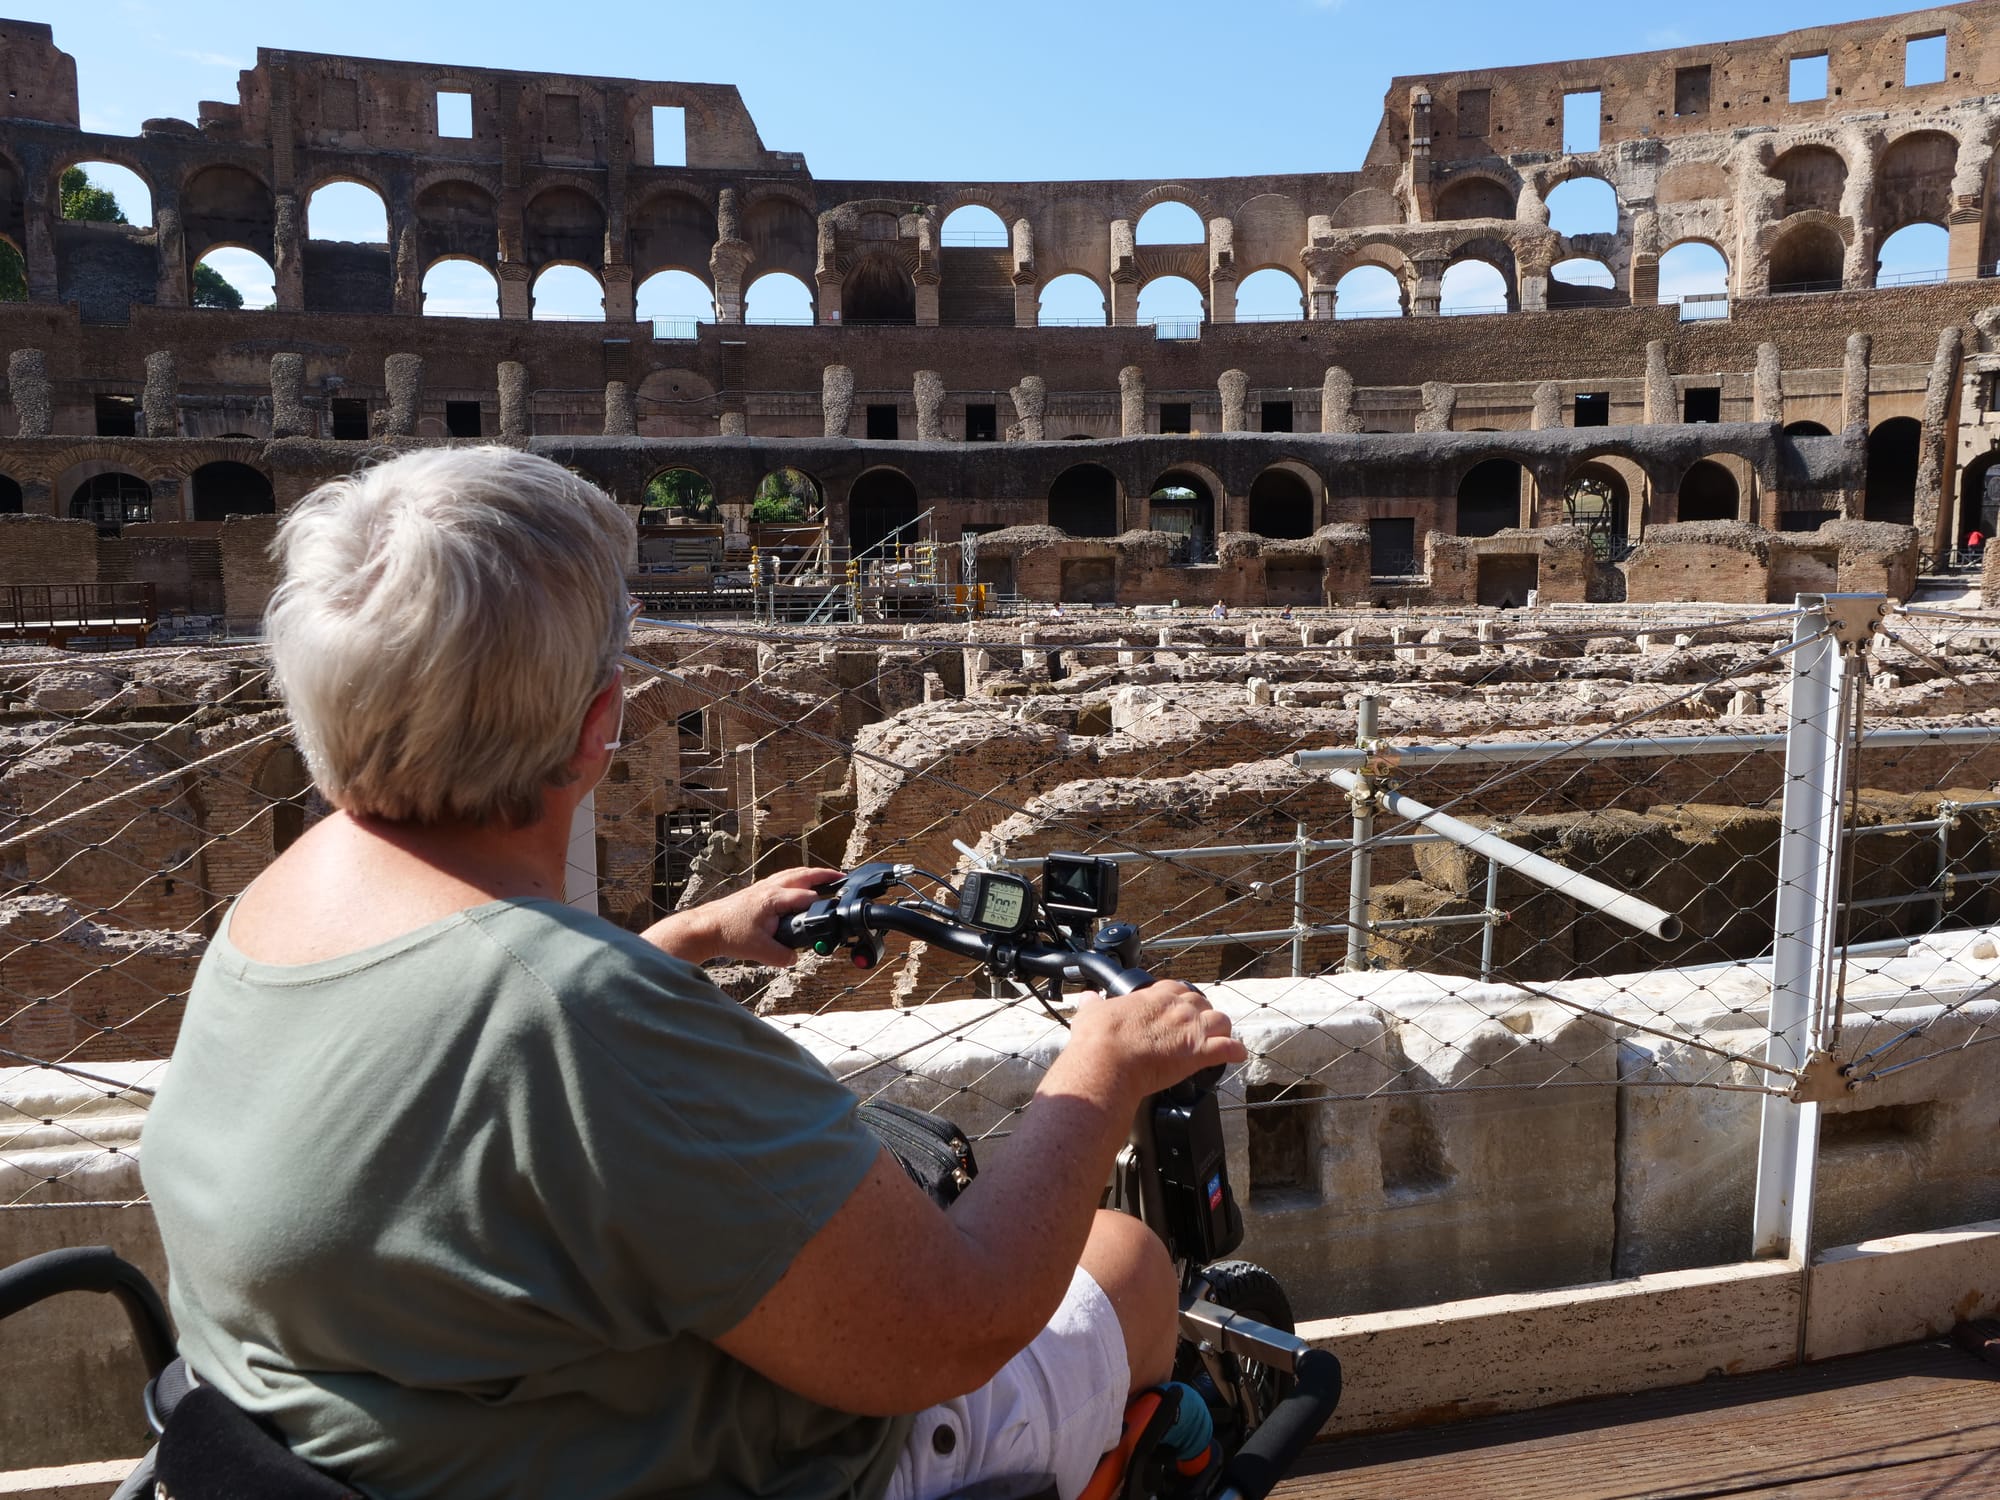 Wheelchair user viewing the Colosseum. An accessible attraction in Rome.